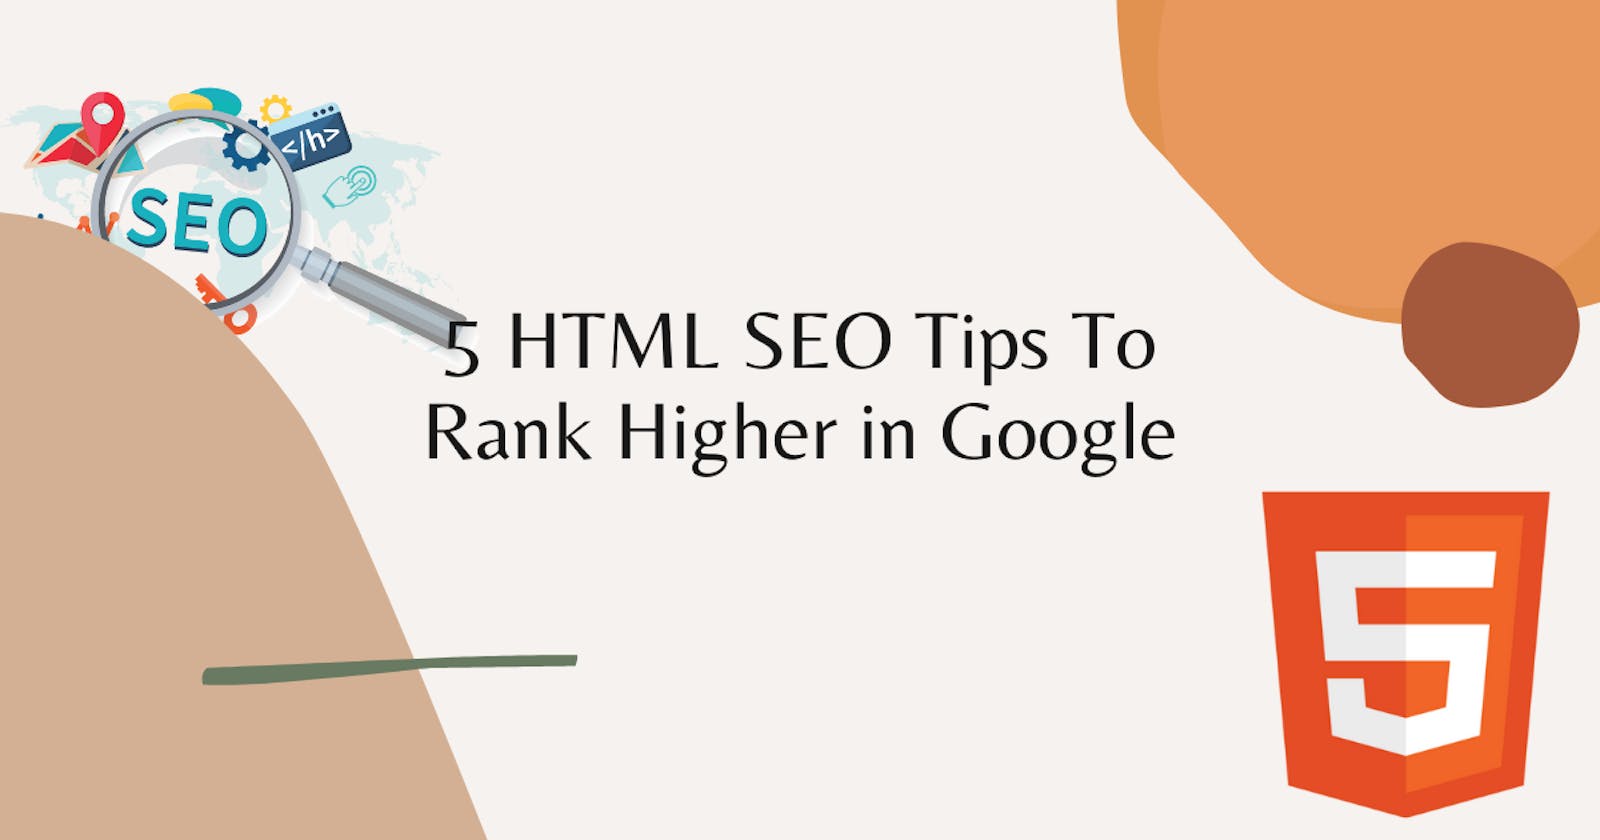 5 HTML SEO Tips To Rank Higher in Google